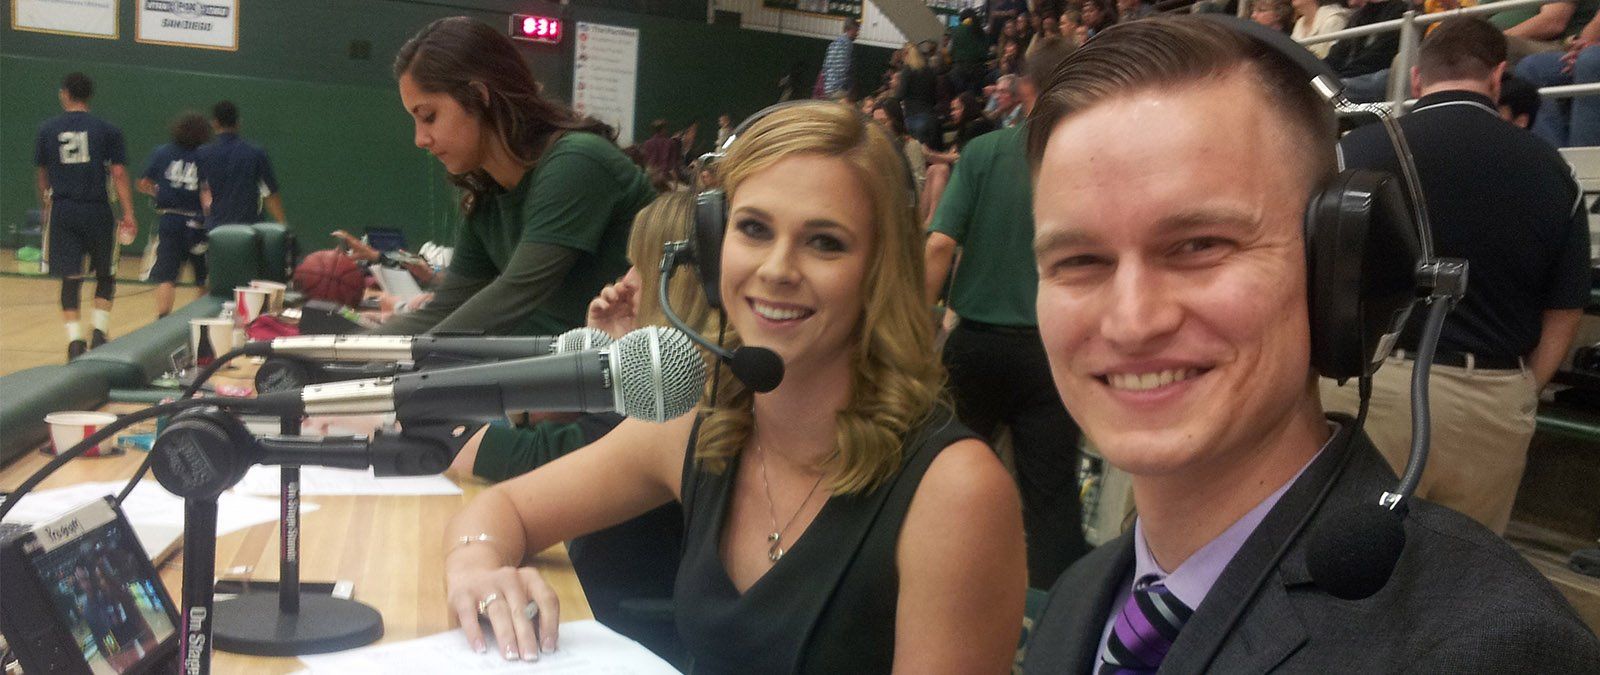 A female and male student broadcasters take in a basketball game.